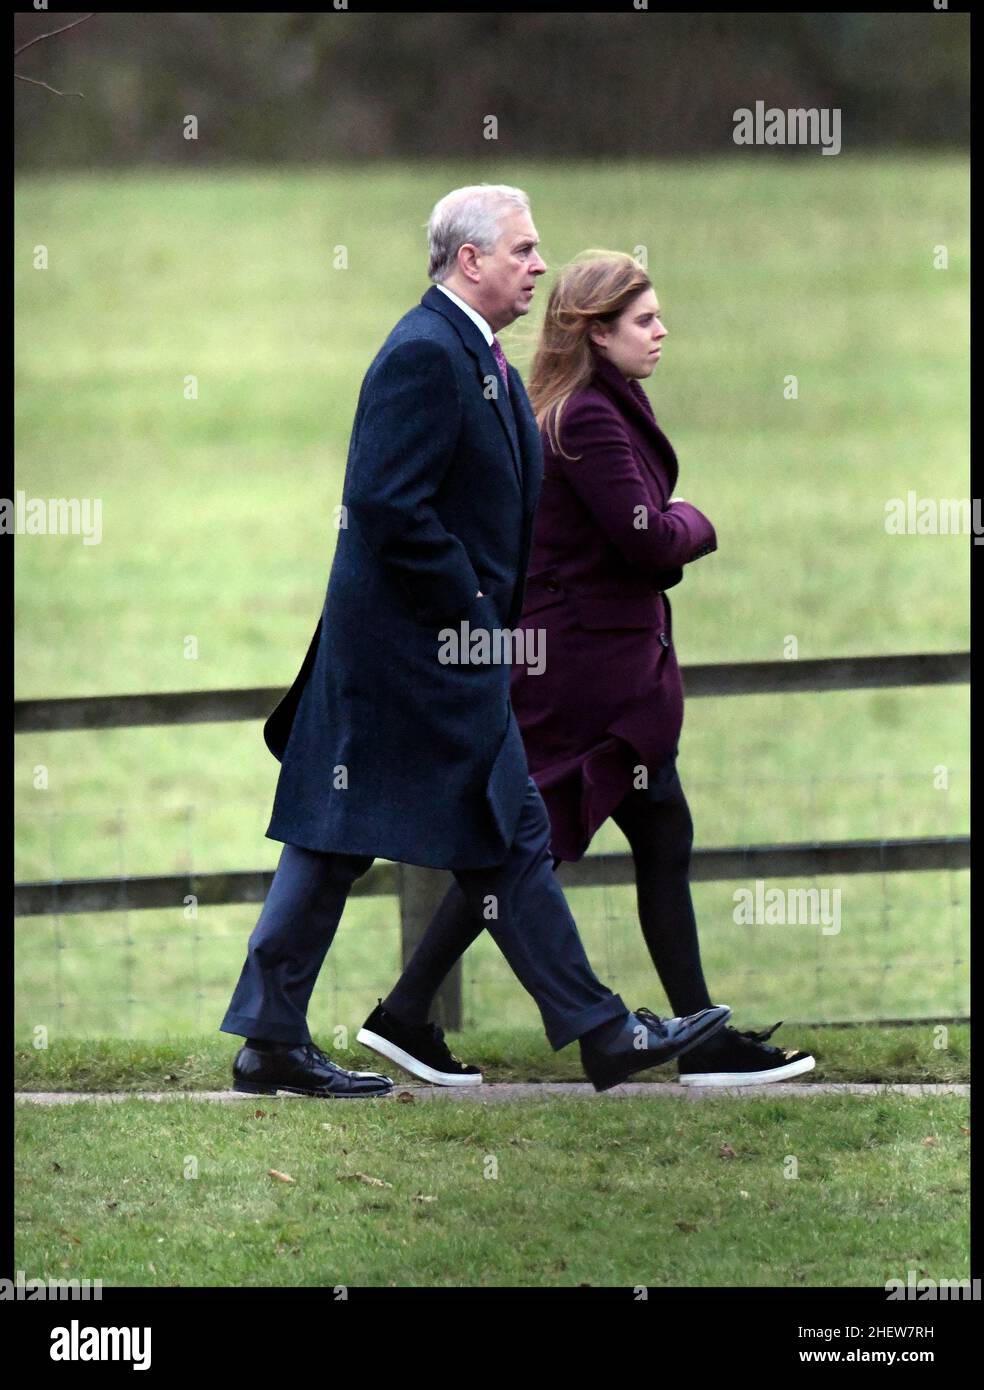 FileImage ©Licensed to Parsons Media. Prince Andrew is to face a civil case in the US. It has been reported that Prince Andrew is to face a civil case in the US over allegations he sexually assaulted a woman when she was 17.  Virginia Giuffre is suing the prince, claiming he abused her in 2001.   Image ©Licensed to Parsons Media. 25/12/2017. Sandringham , United Kingdom. HM Queen Elizabeth II Christmas Day Church Service. Prince Andrew with Princess Beatrice of York join HM Queen Elizabeth II at  St. Mary Magdalene Church on her Sandringham estate t in Norfolk, for the Christmas Day service. Stock Photo